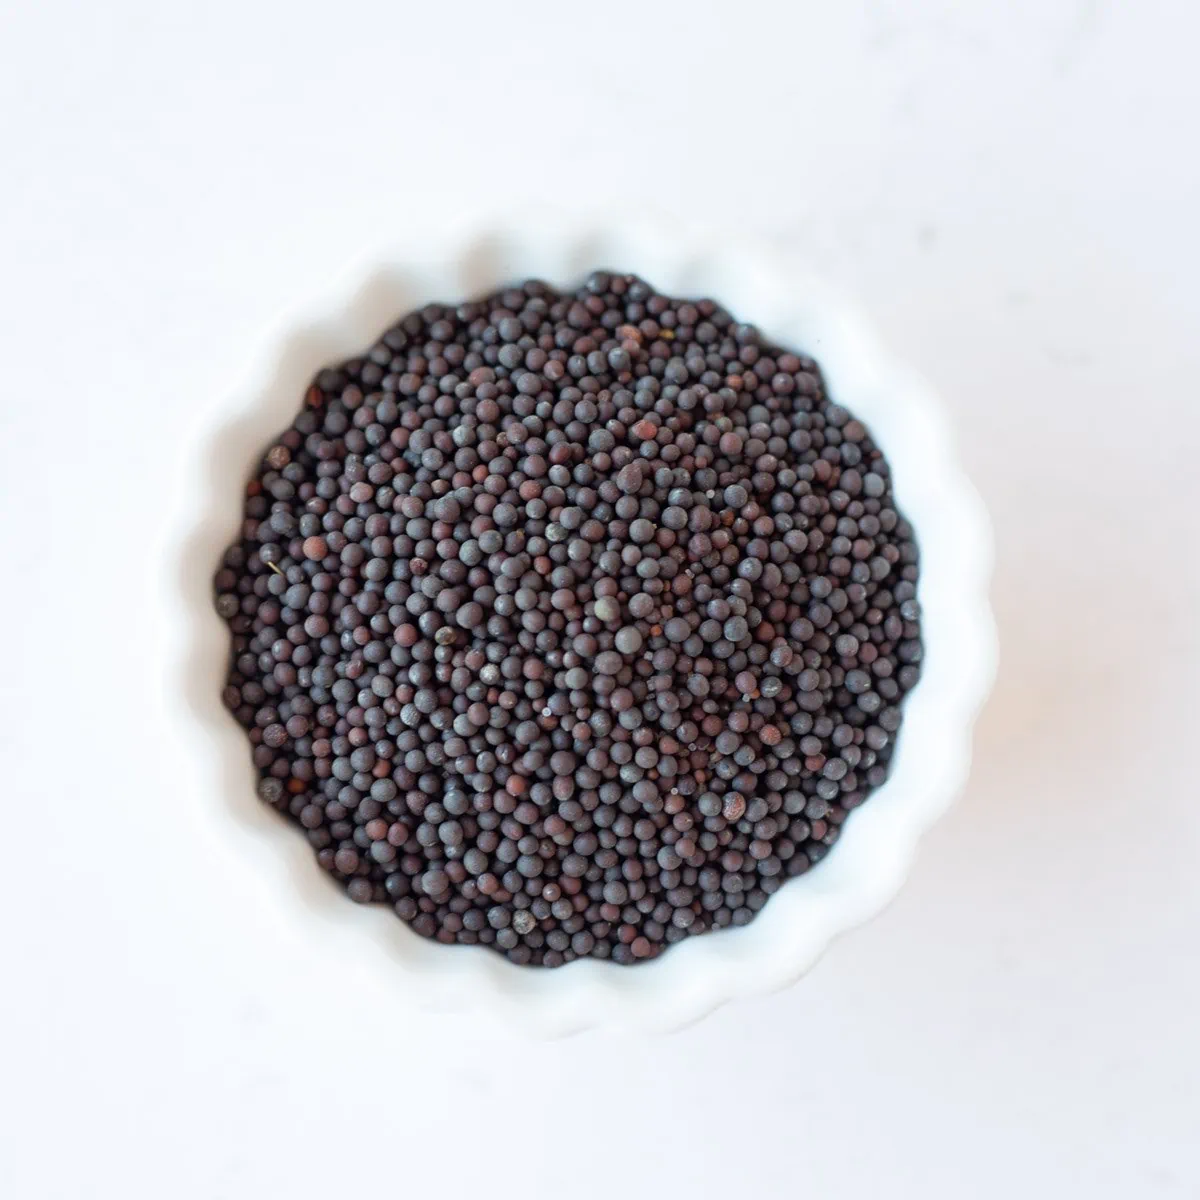 Mustard seeds in a small white bowl